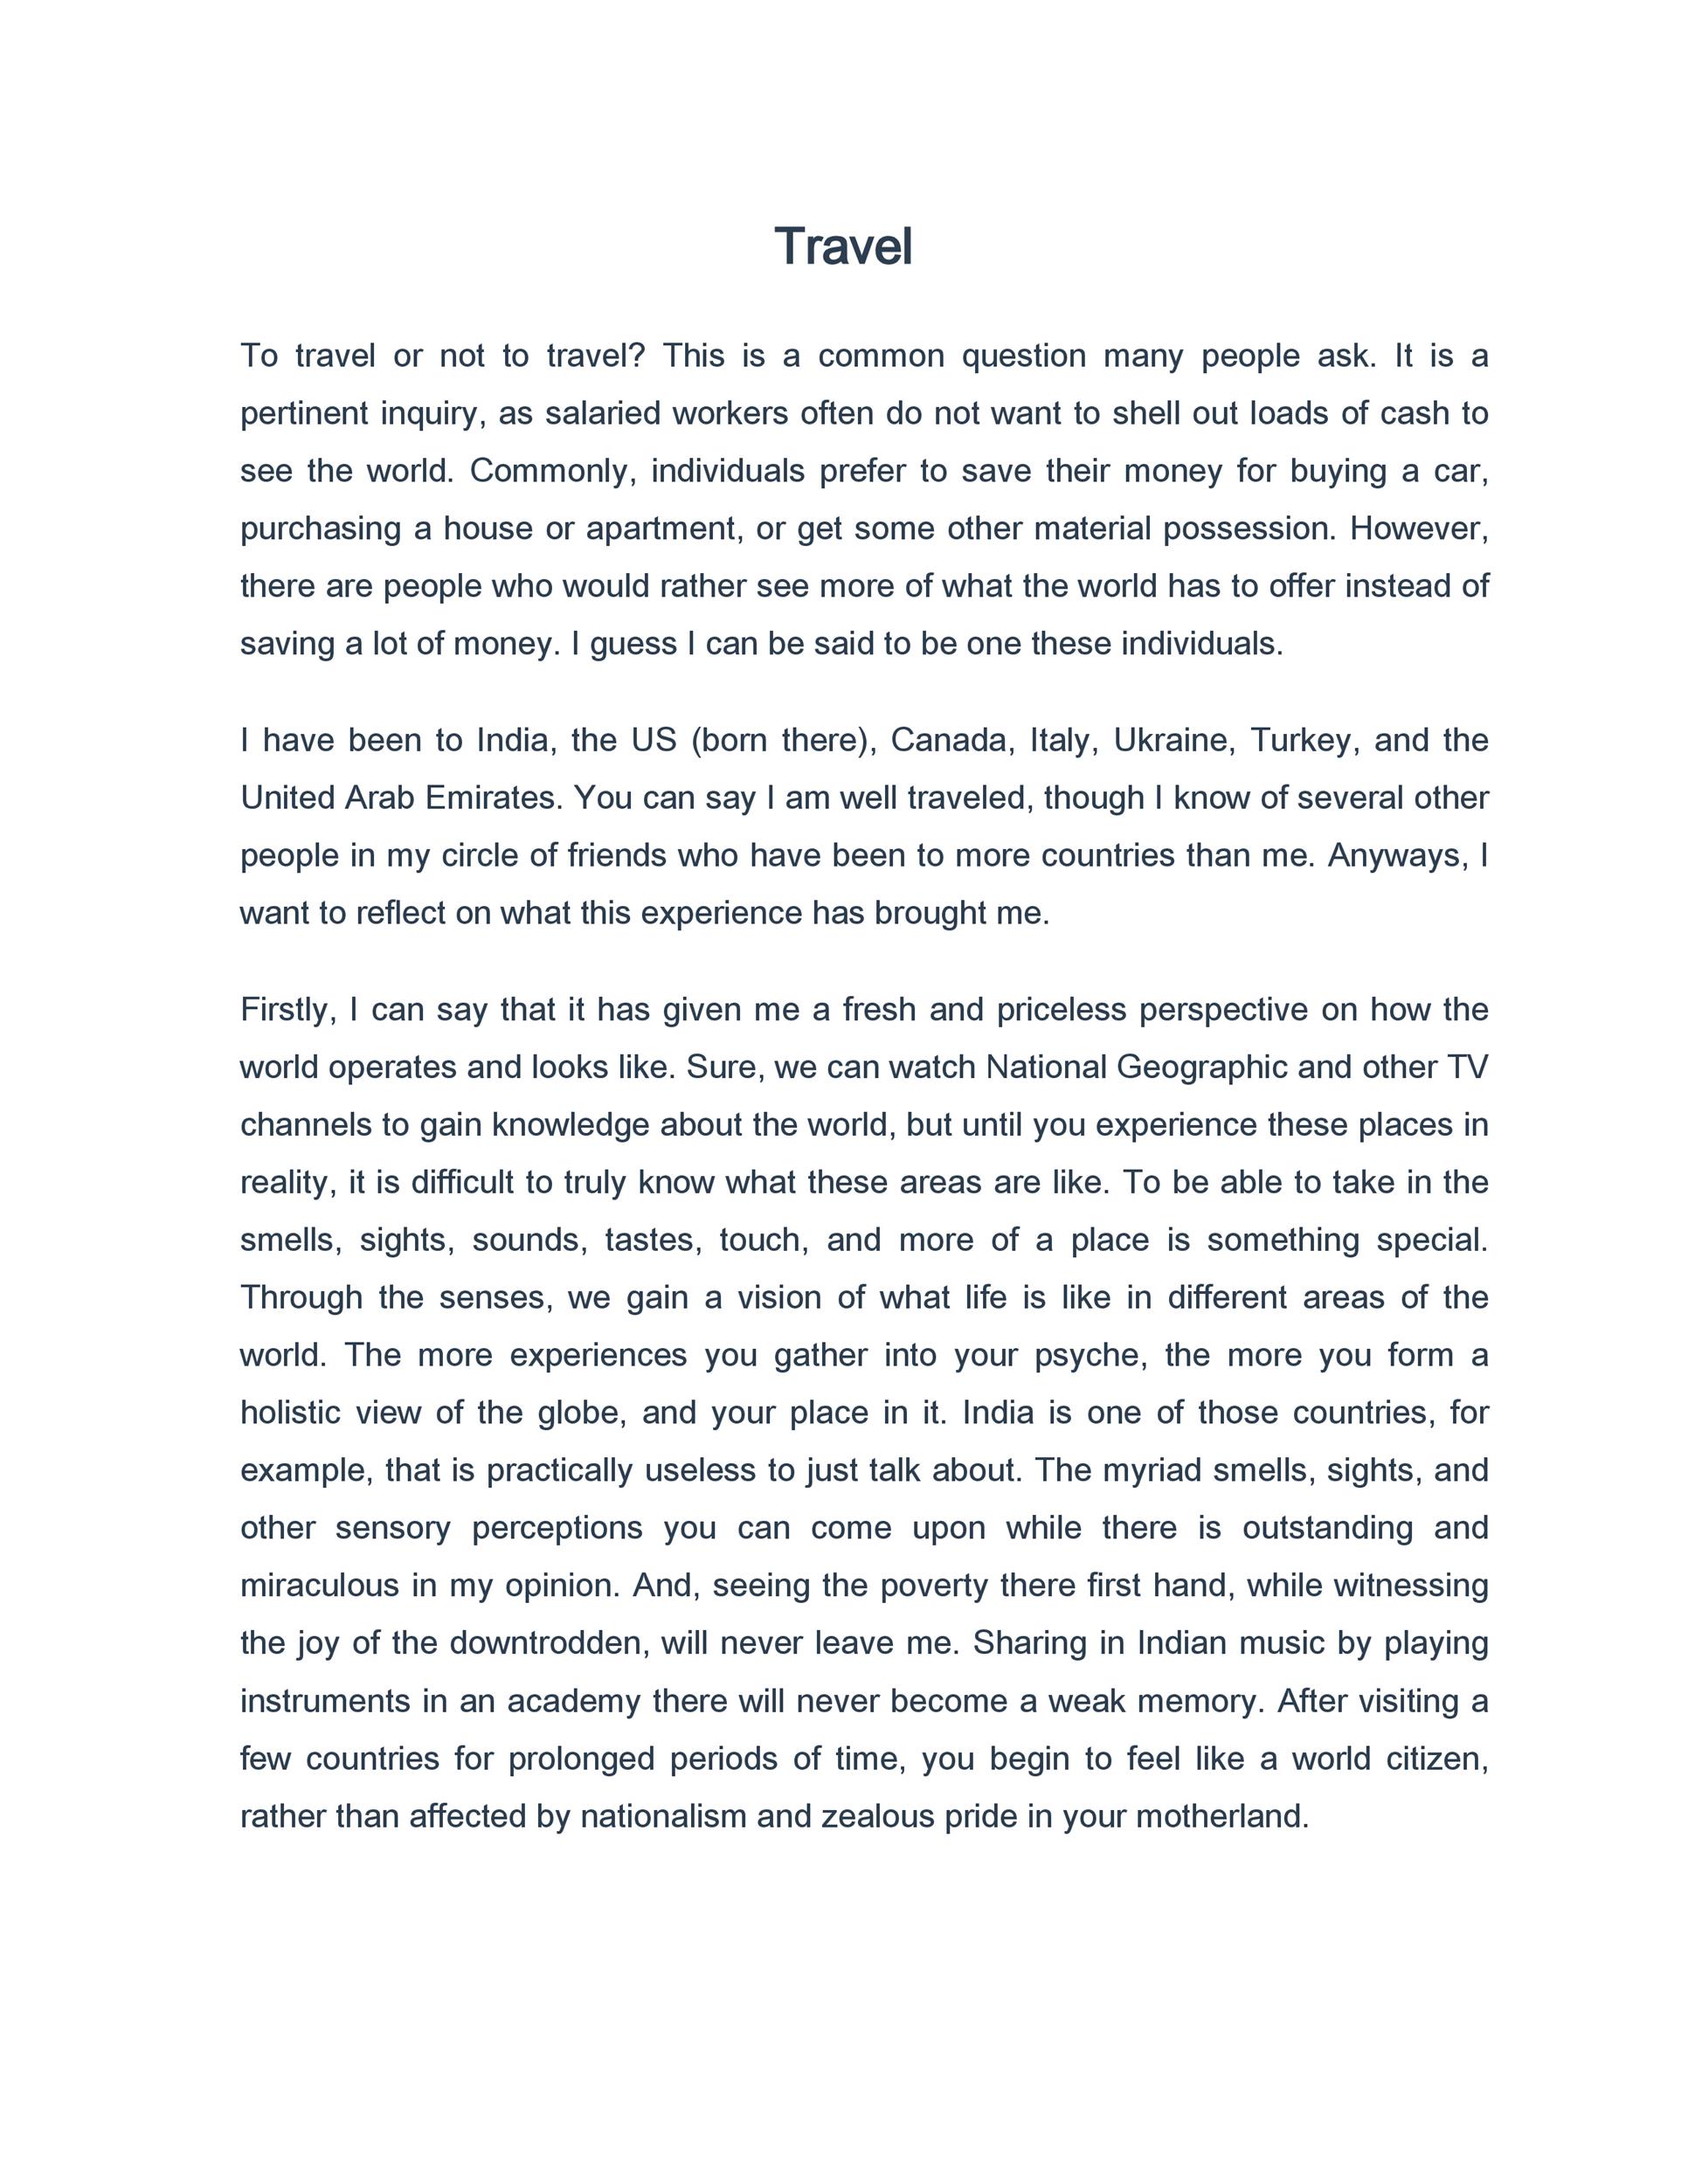 a reflective essay on personal experiences